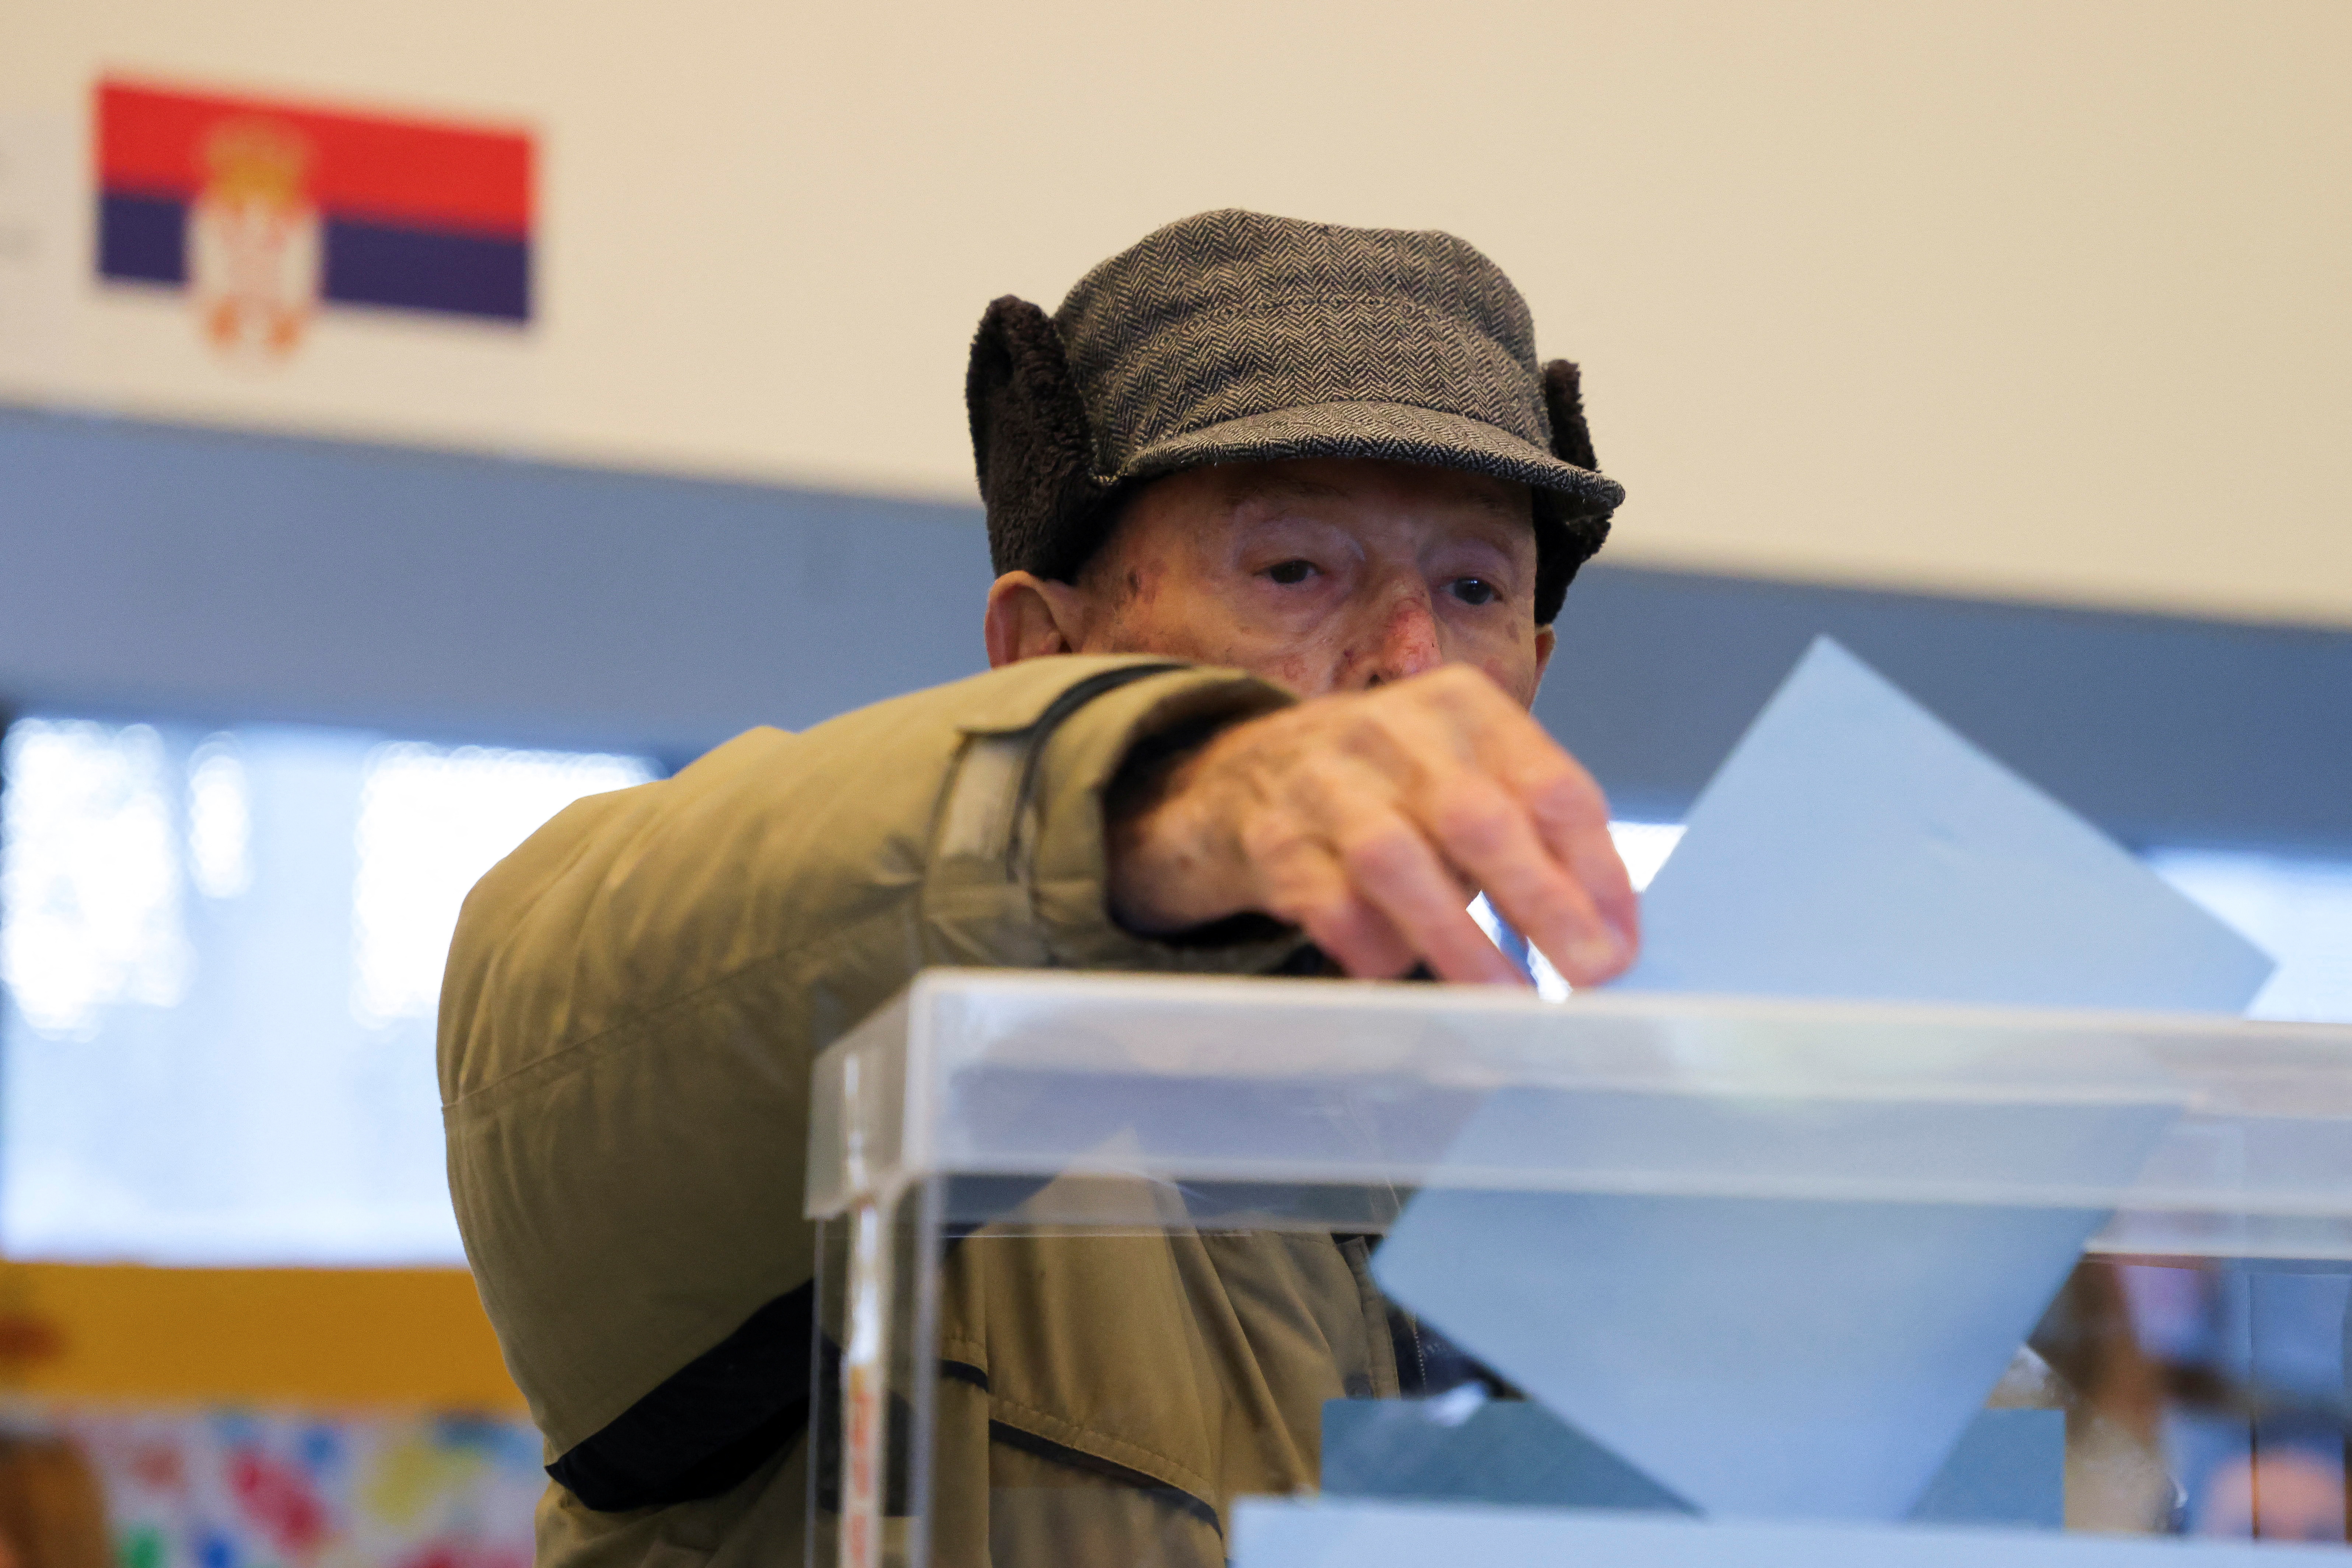 A man casts his vote at a polling station during the general election, in Belgrade